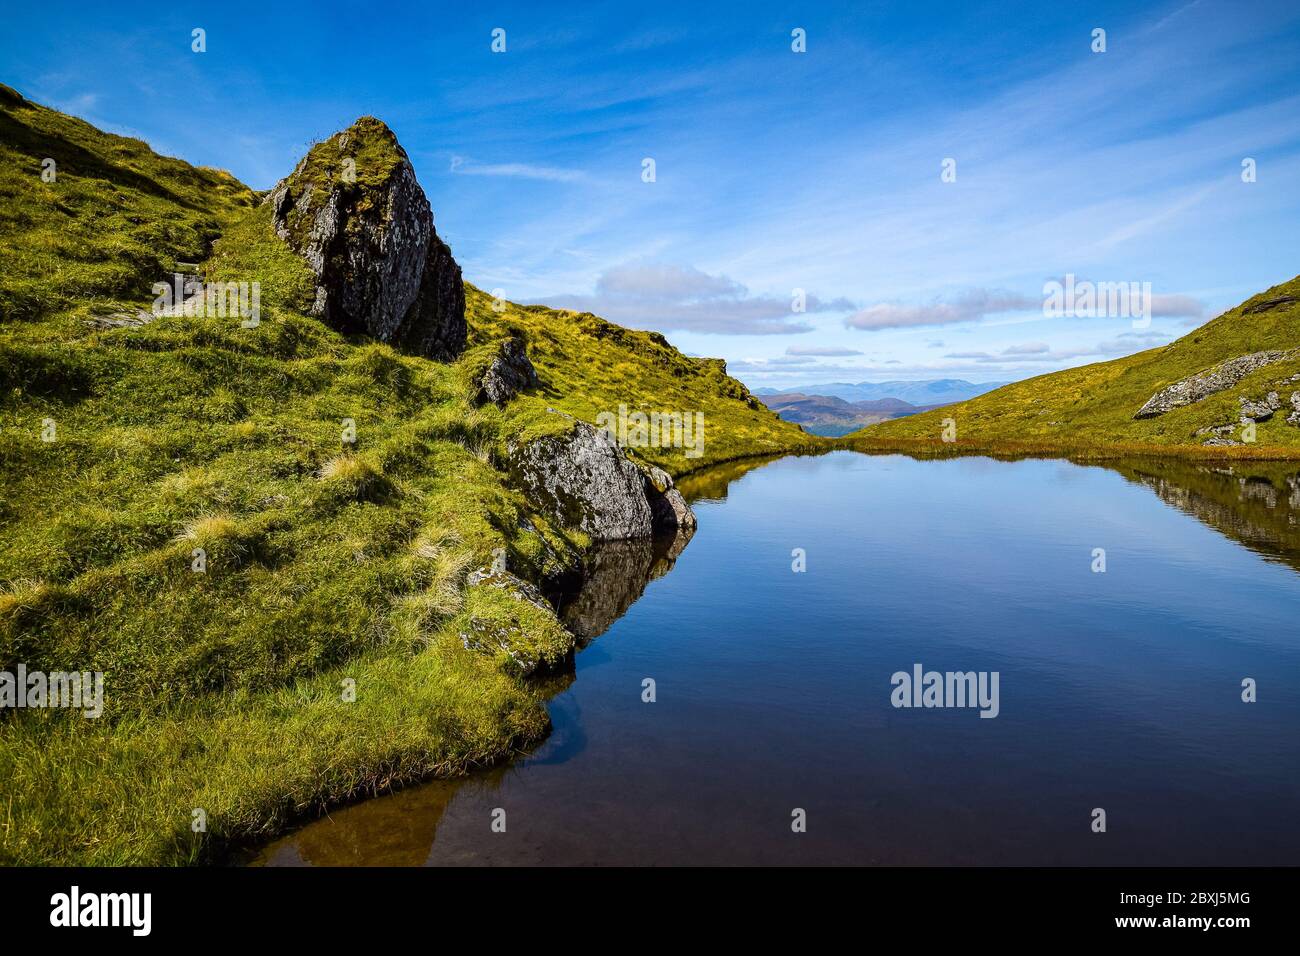 Scottish Highlands summer landscape with a deep blue sky and rocks reflecting in a little pond near the peak of Meall nan Tarmachan. Stock Photo